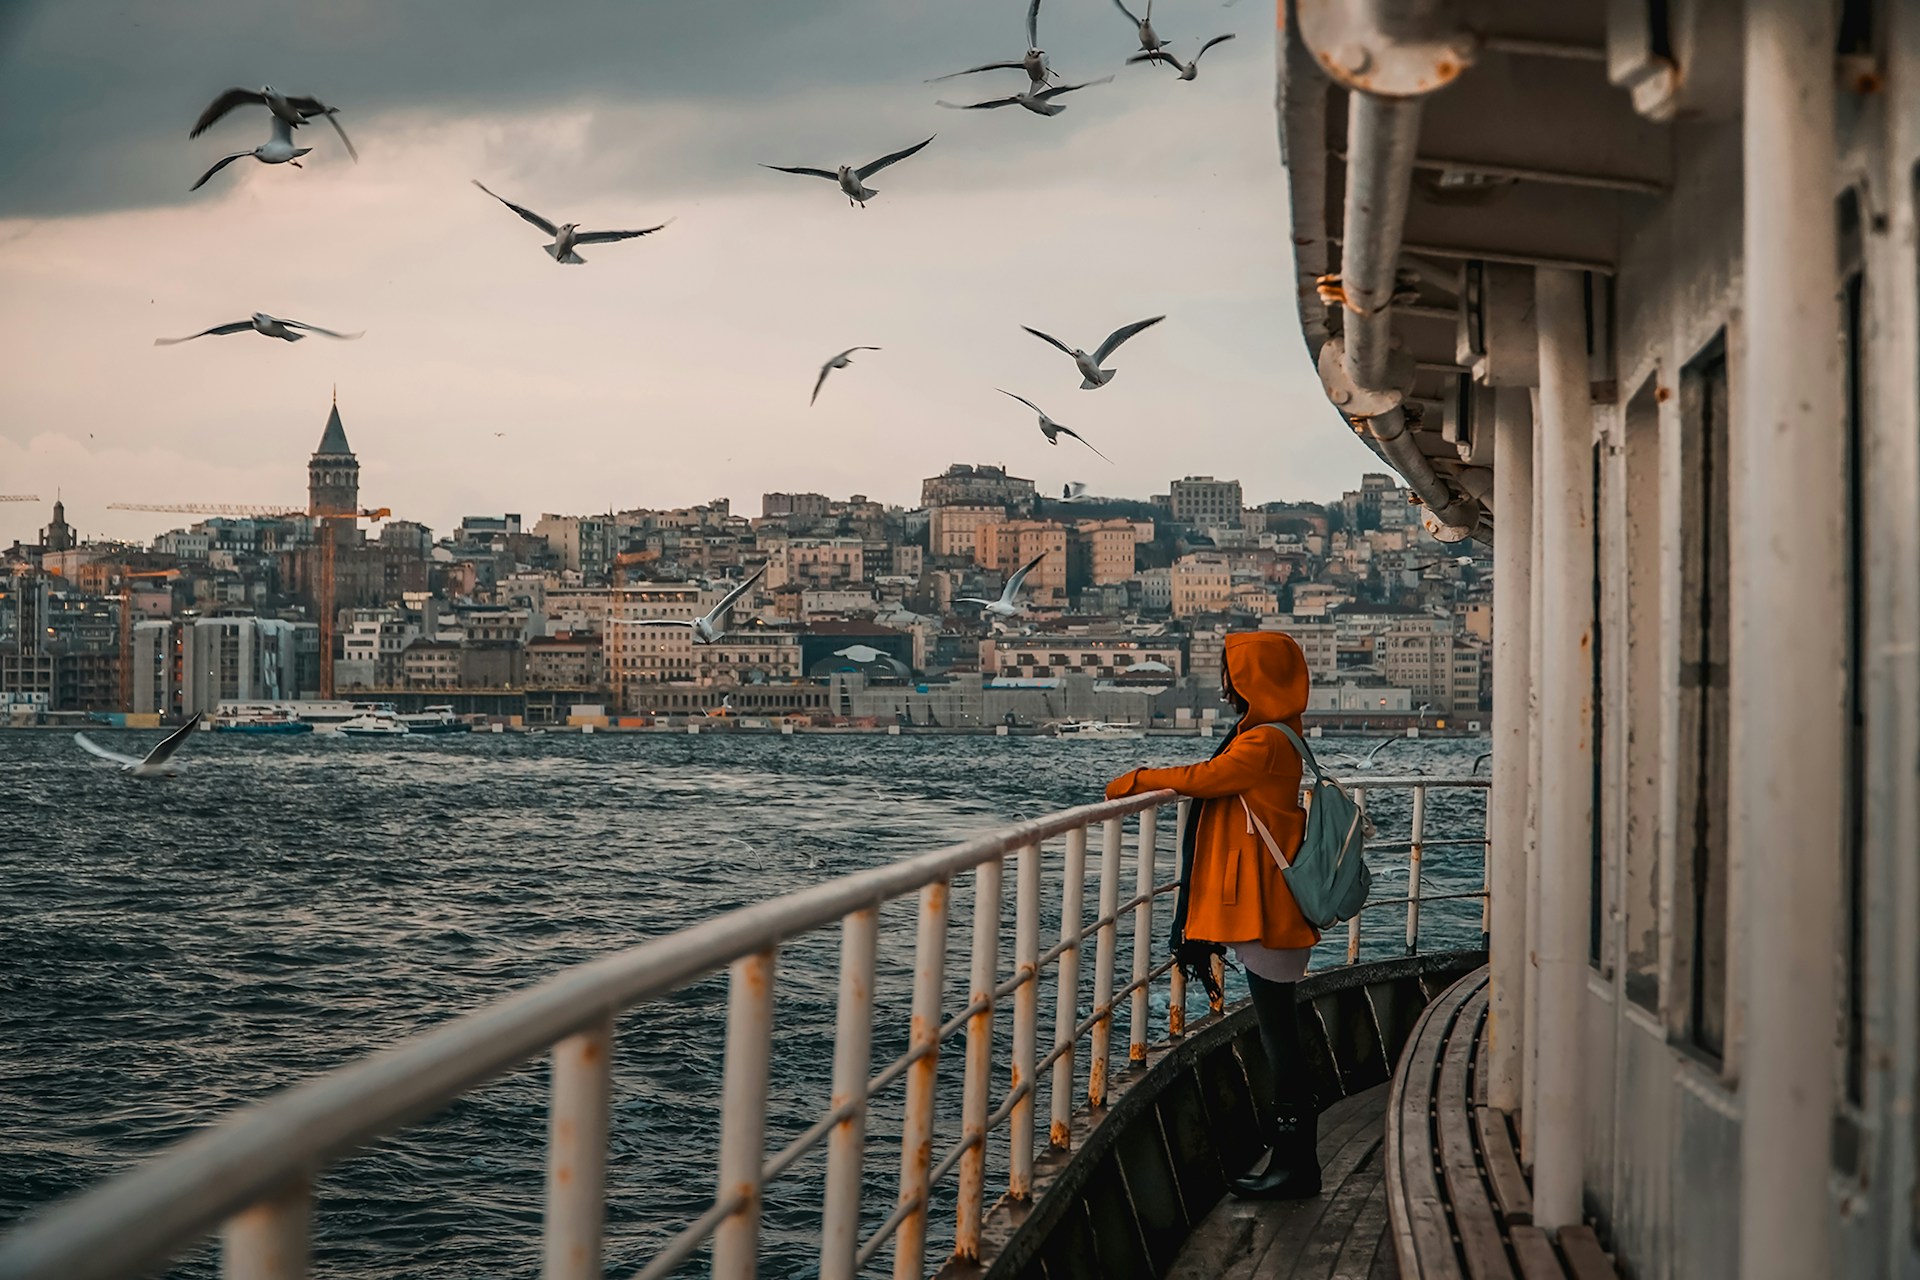 <p>Istanbul mesmerizes tourists with its historic sites like the Hagia Sophia, Grand Bazaar, and Topkapi Palace. The country has an amazing blend of cultures, breathtaking views, and delicious cuisines.</p>